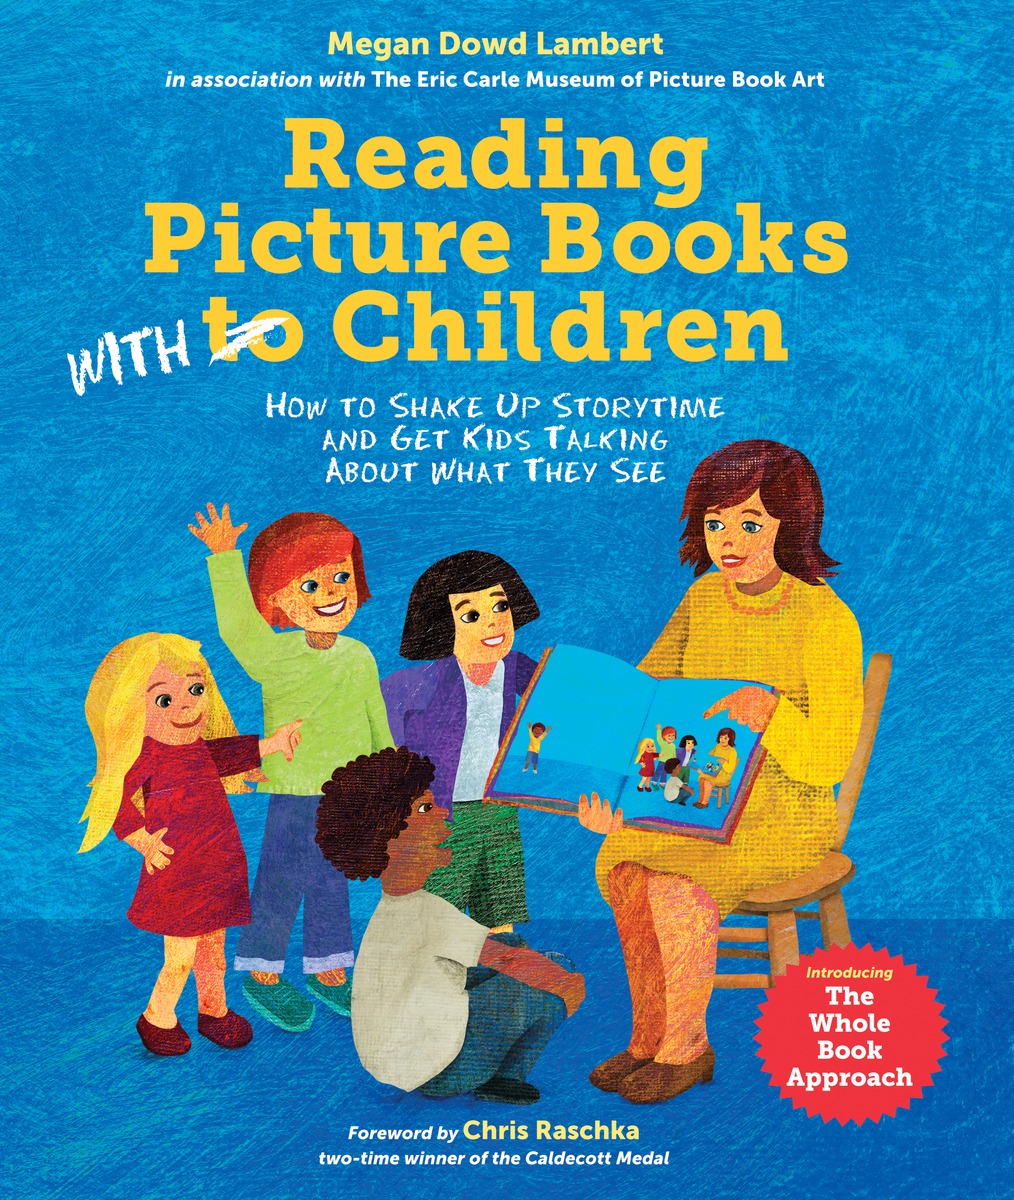 READING PICTURE BOOKS